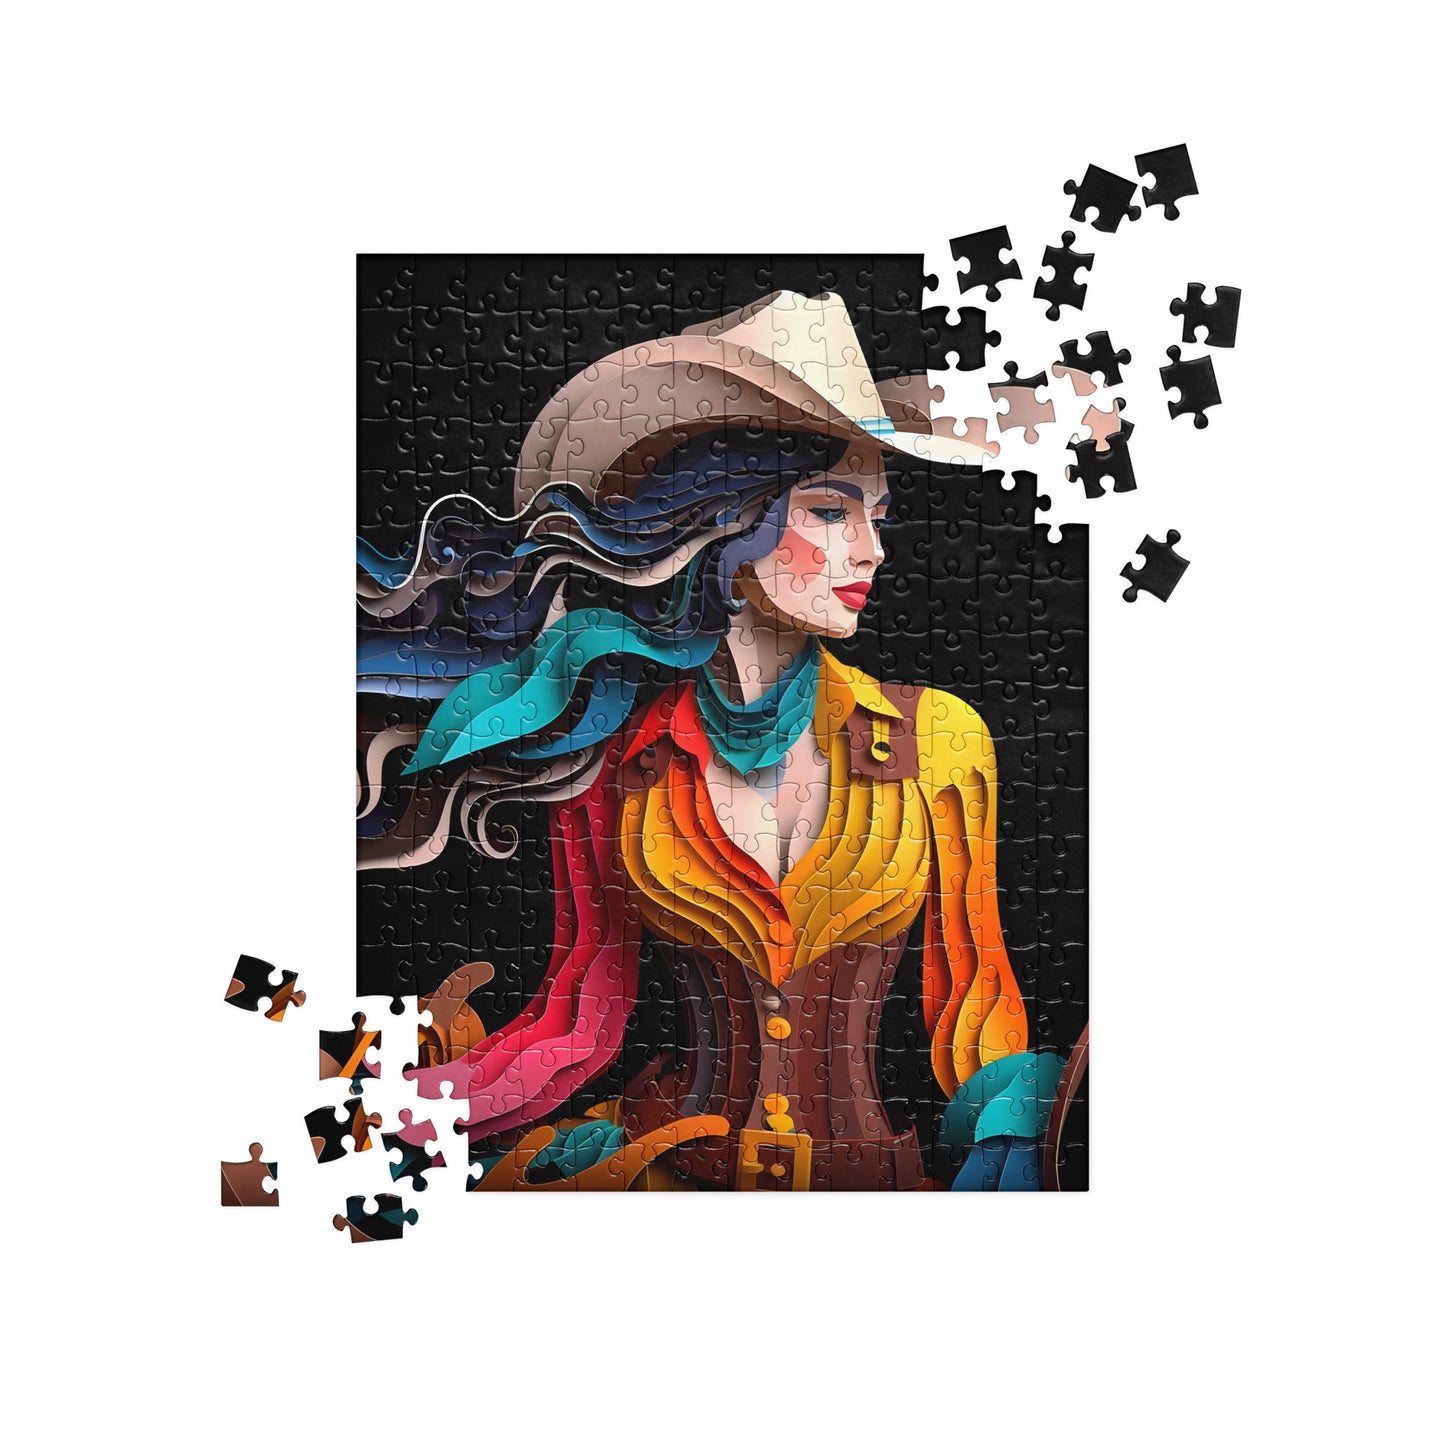 3D Cowboy and Cowgirl - Jigsaw Puzzle #1